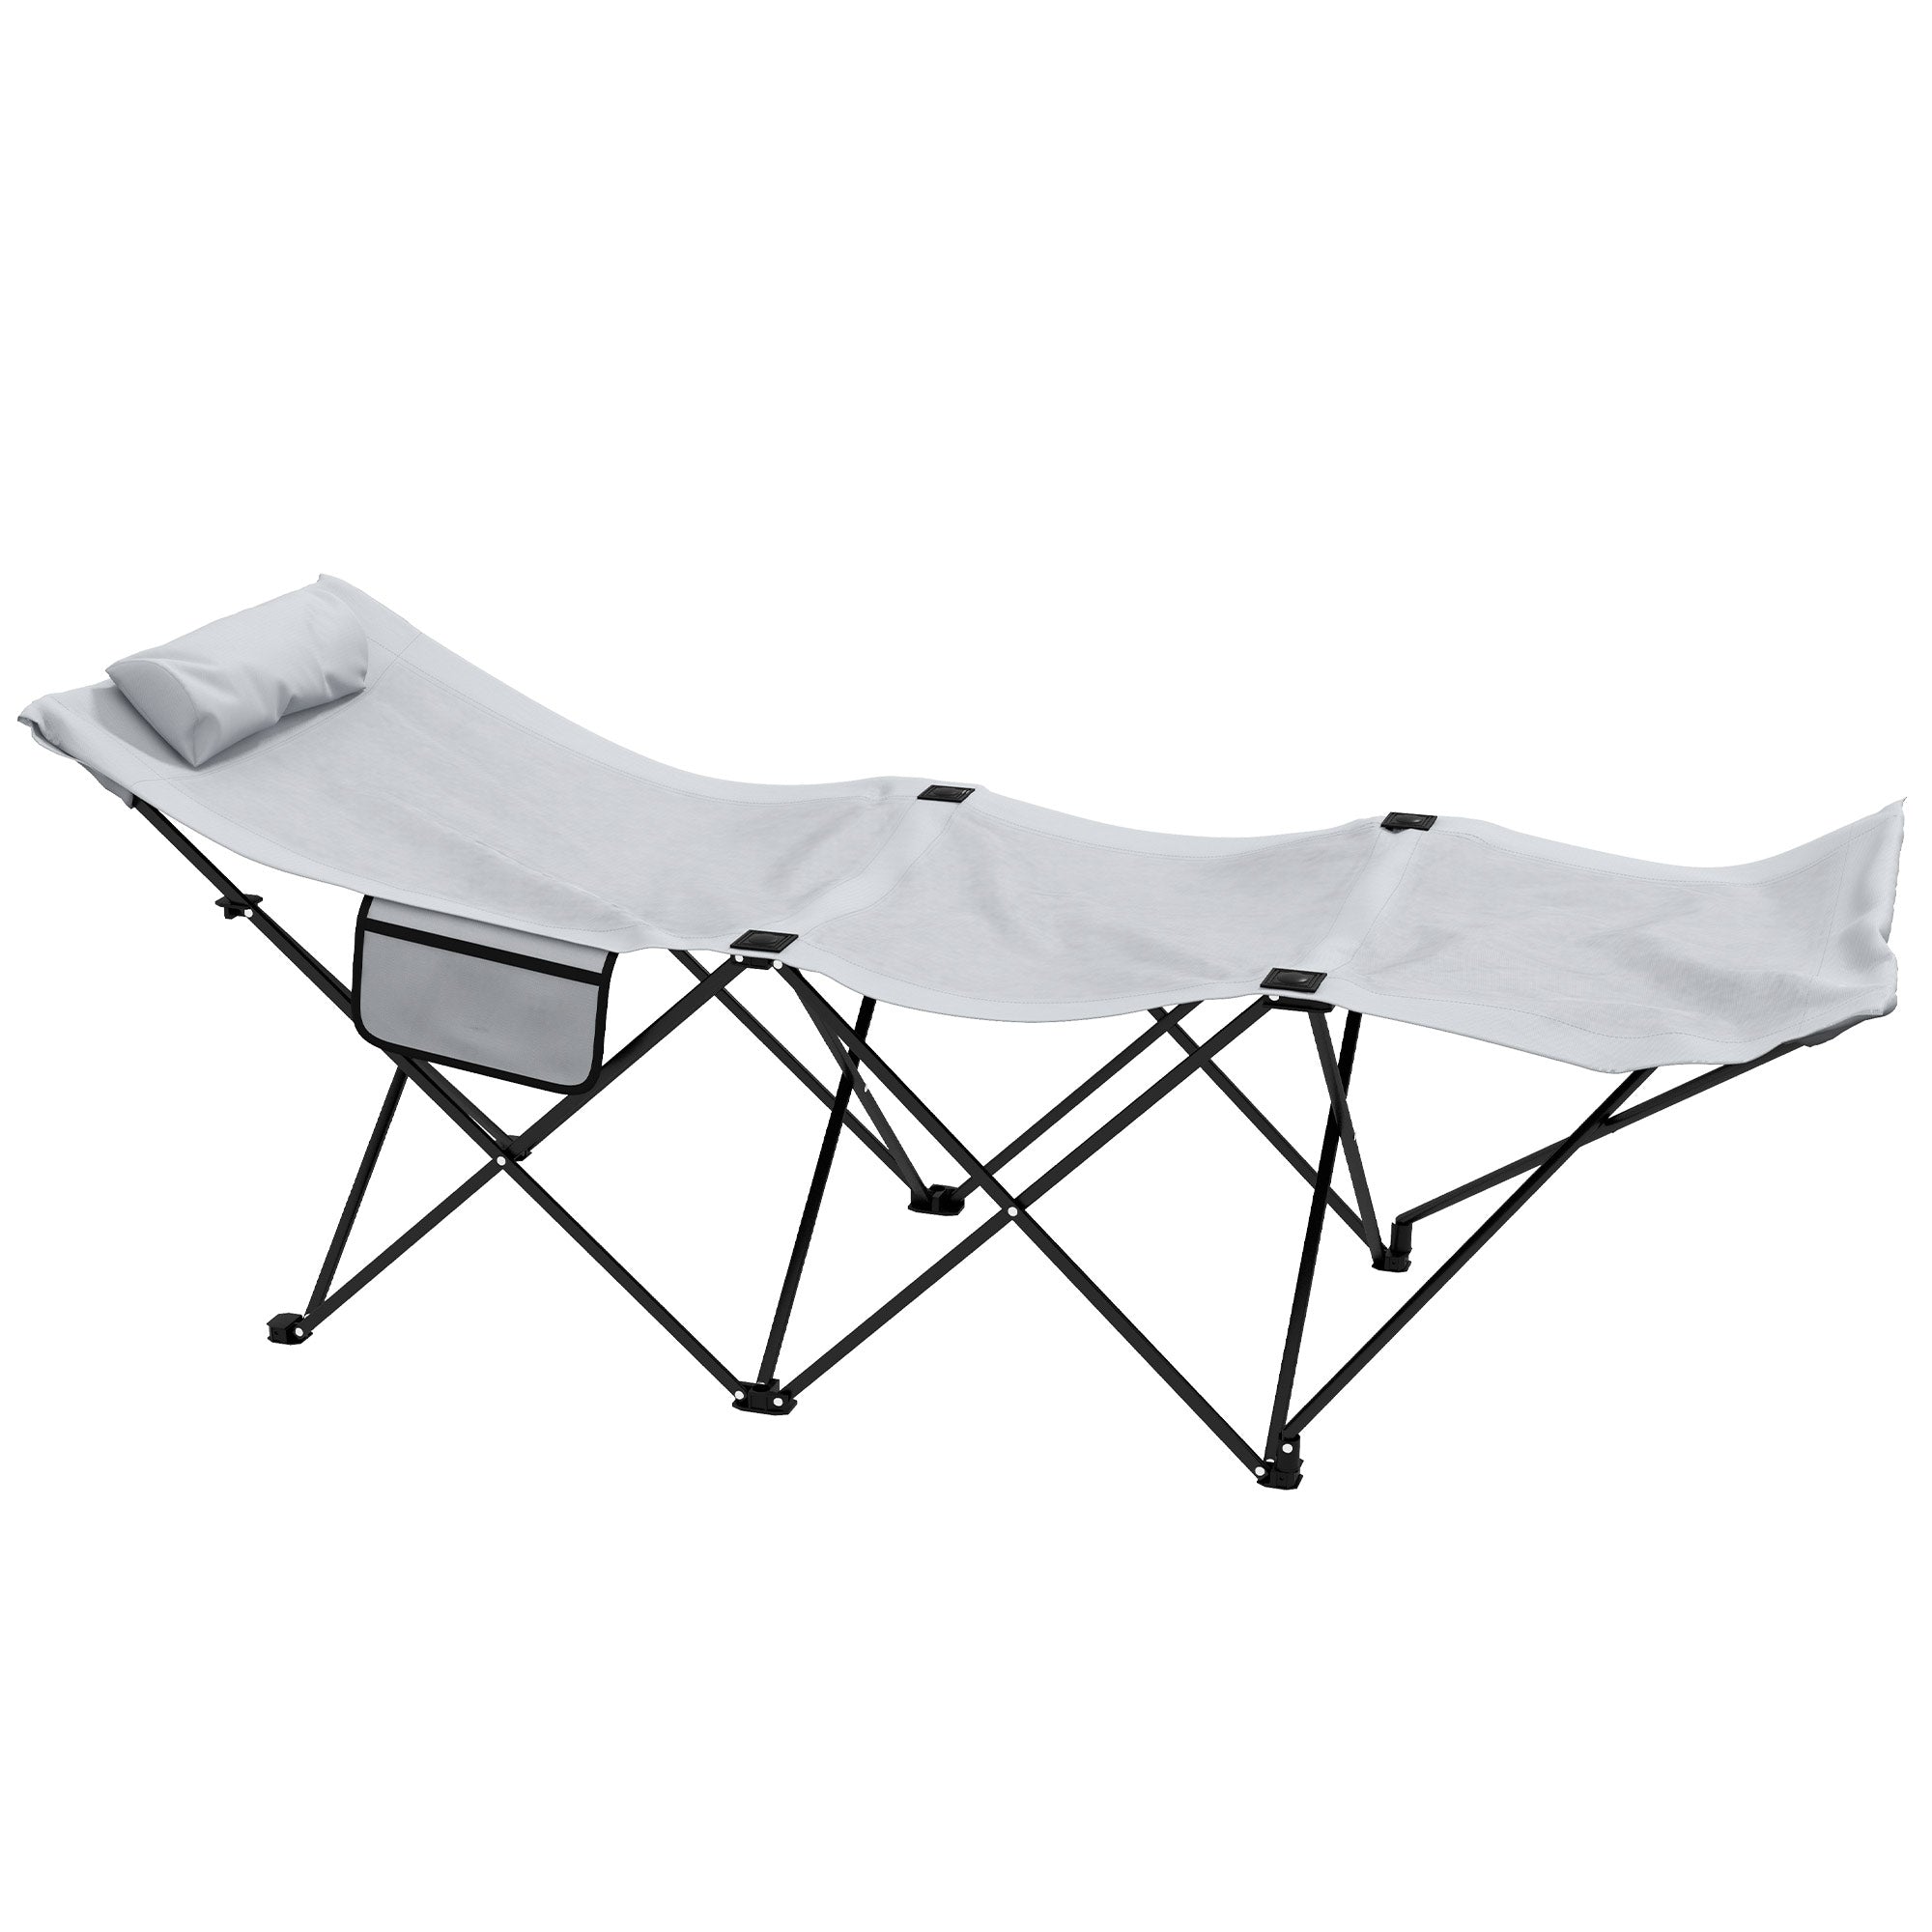 Foldable Sun Lounger, Outdoor Tanning Sun Lounger Chair with Side Pocket, Headrest, Oxford Seat, for Beach, Yard, Patio, Light Grey-0